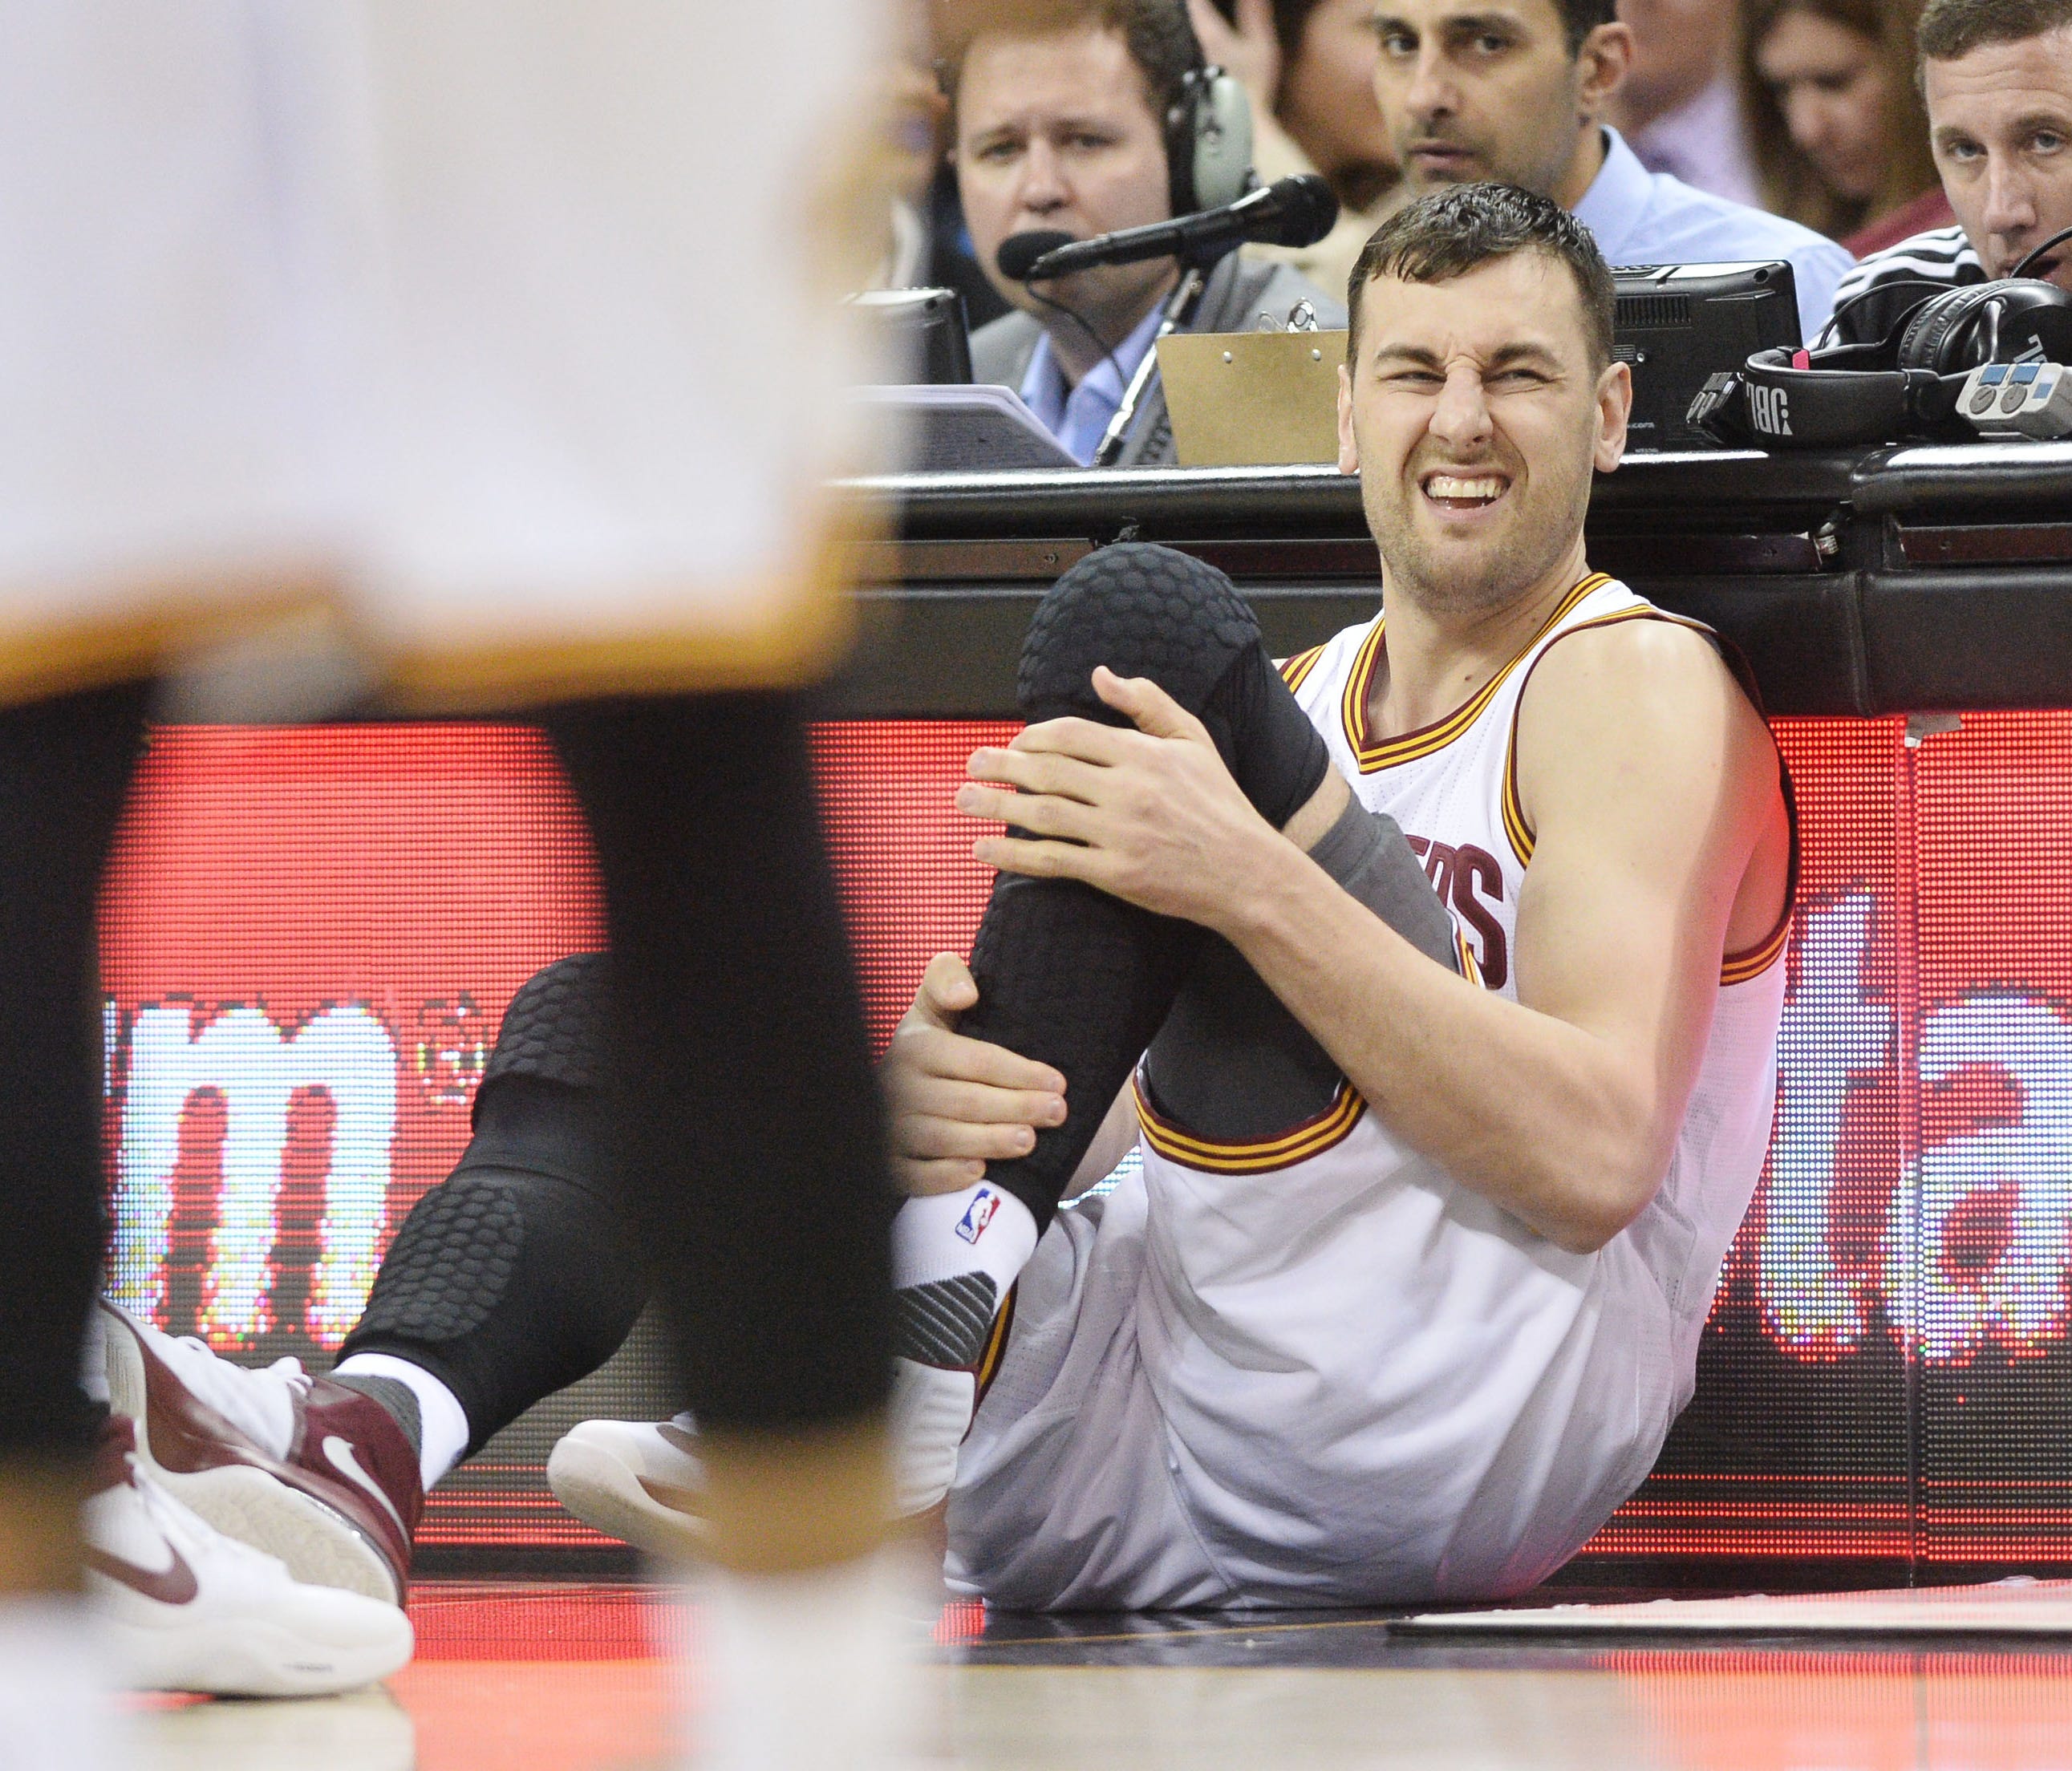 Cleveland Cavaliers center Andrew Bogut (6) lays on the floor after being injured during the first half against the Miami Heat at Quicken Loans Arena.